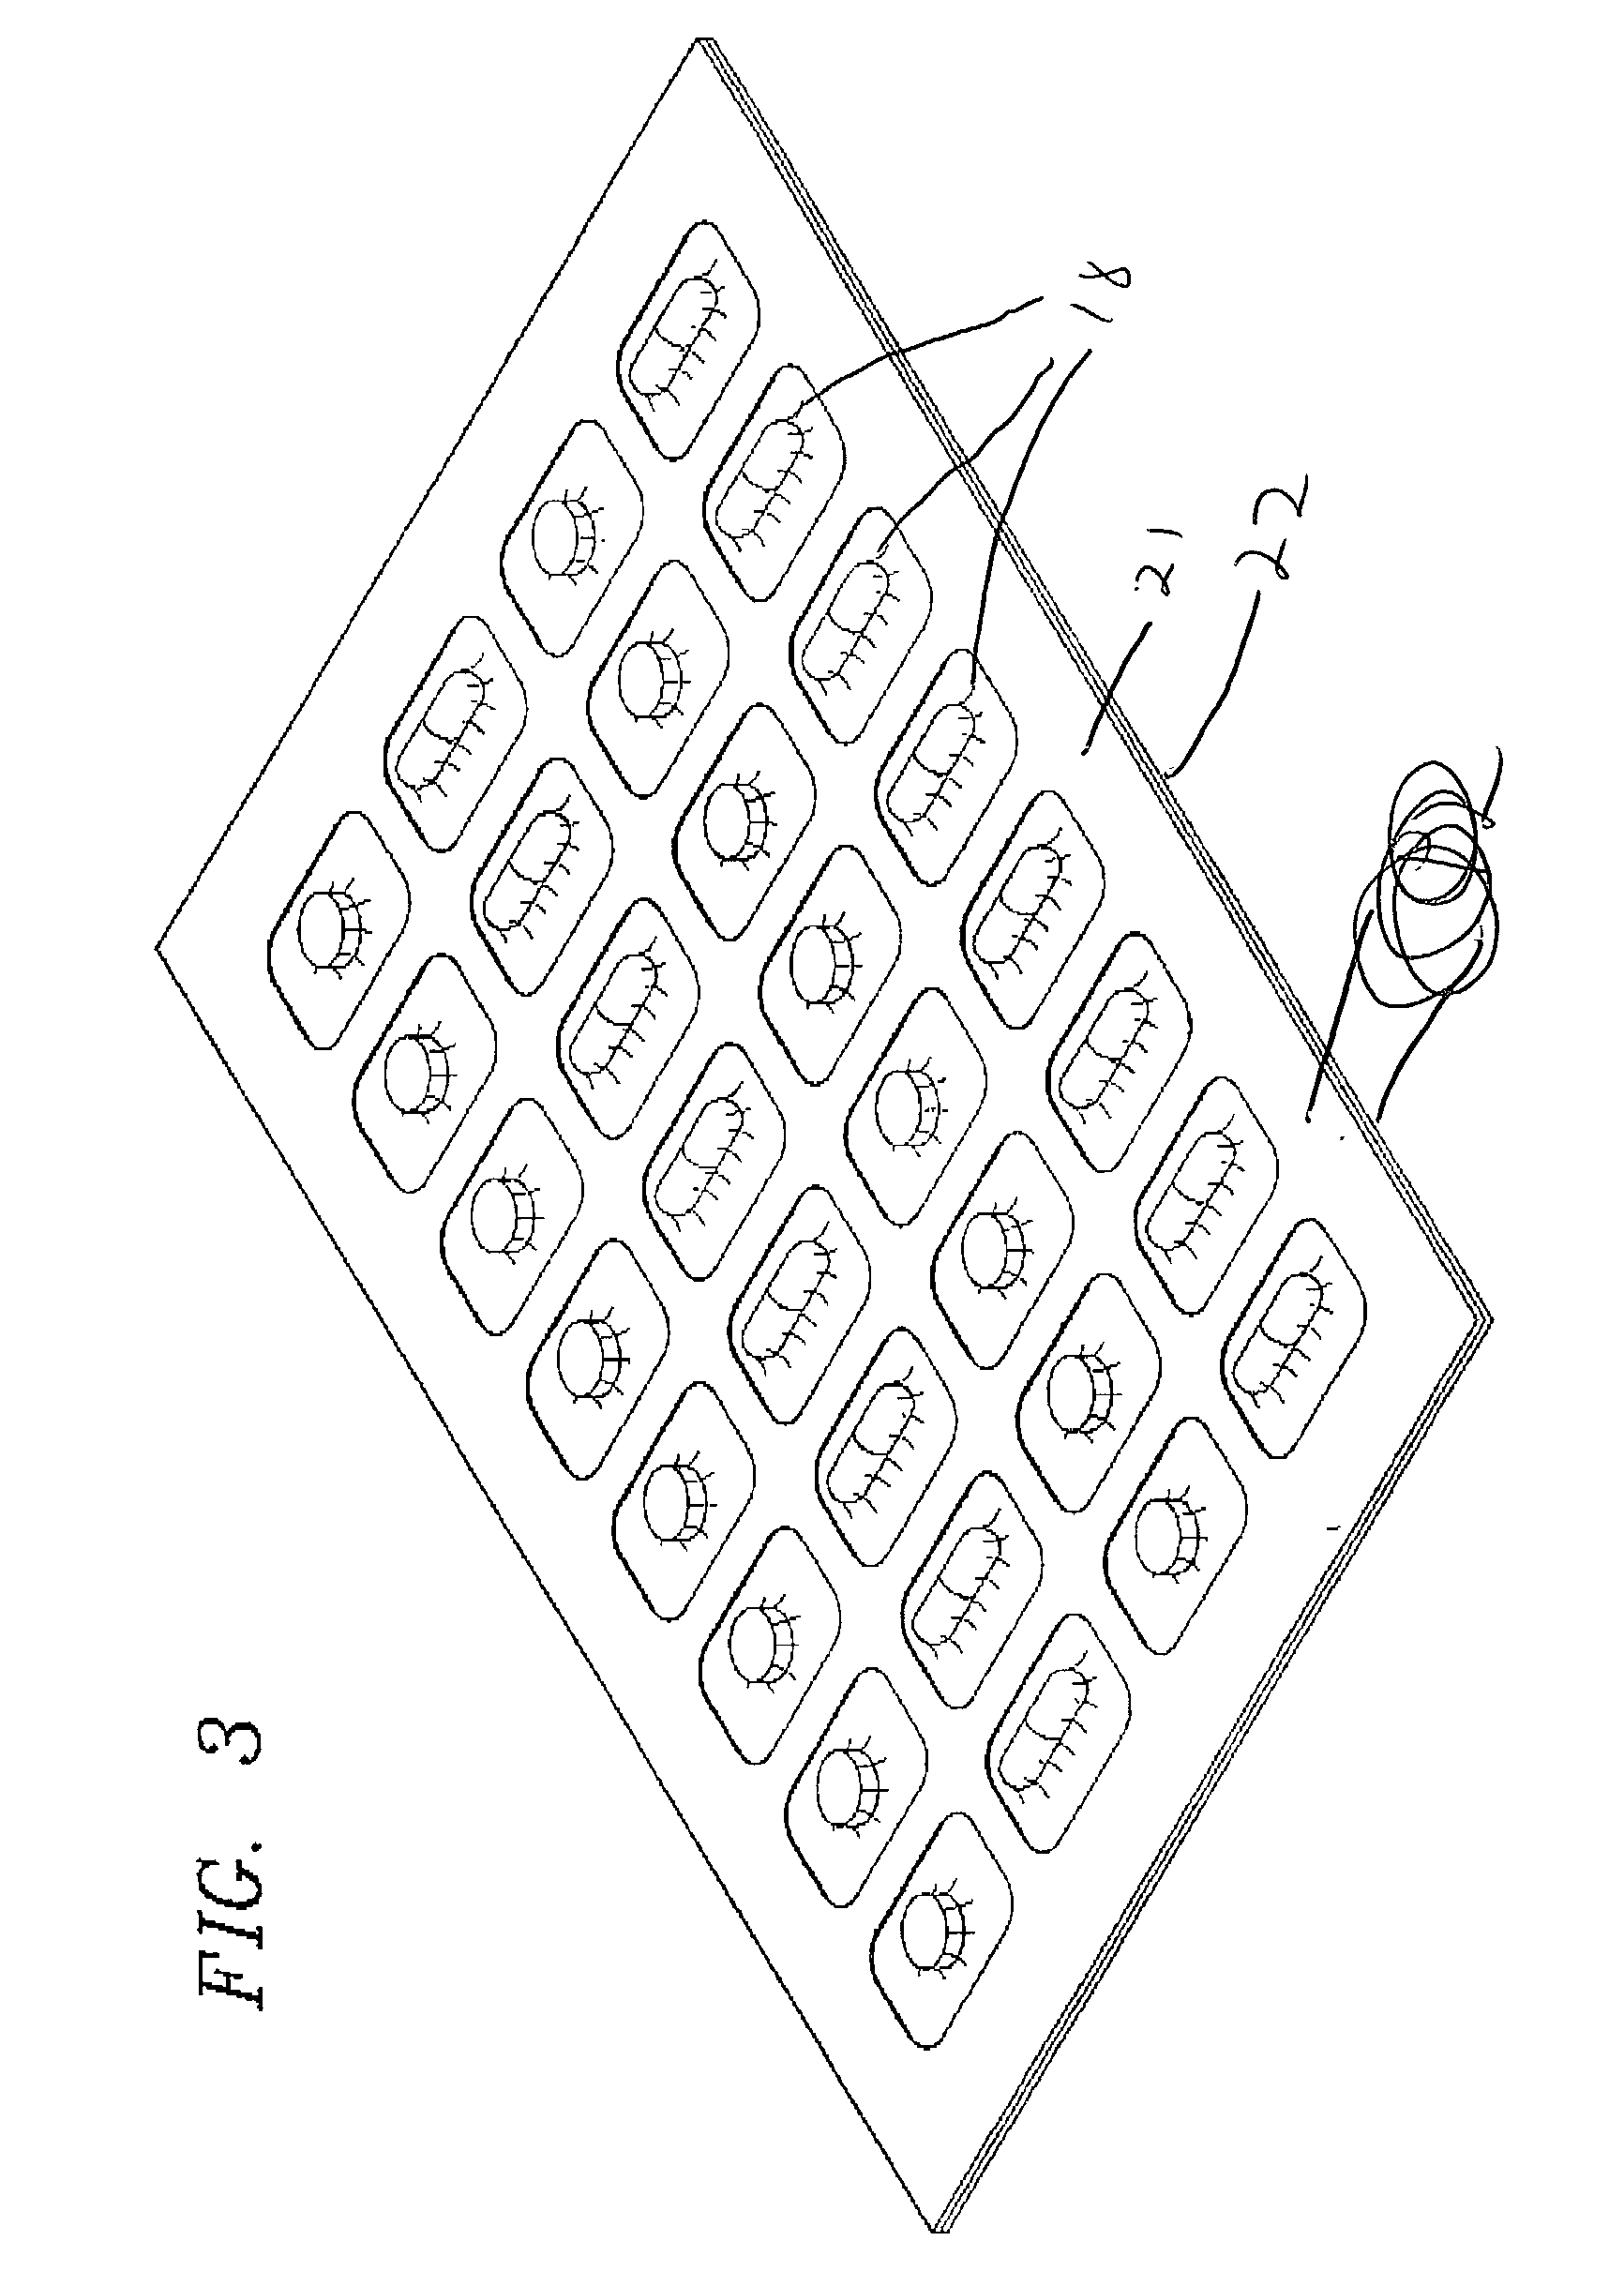 Systems and methods for forming blister packages with support members for pharmaceutical product packaging